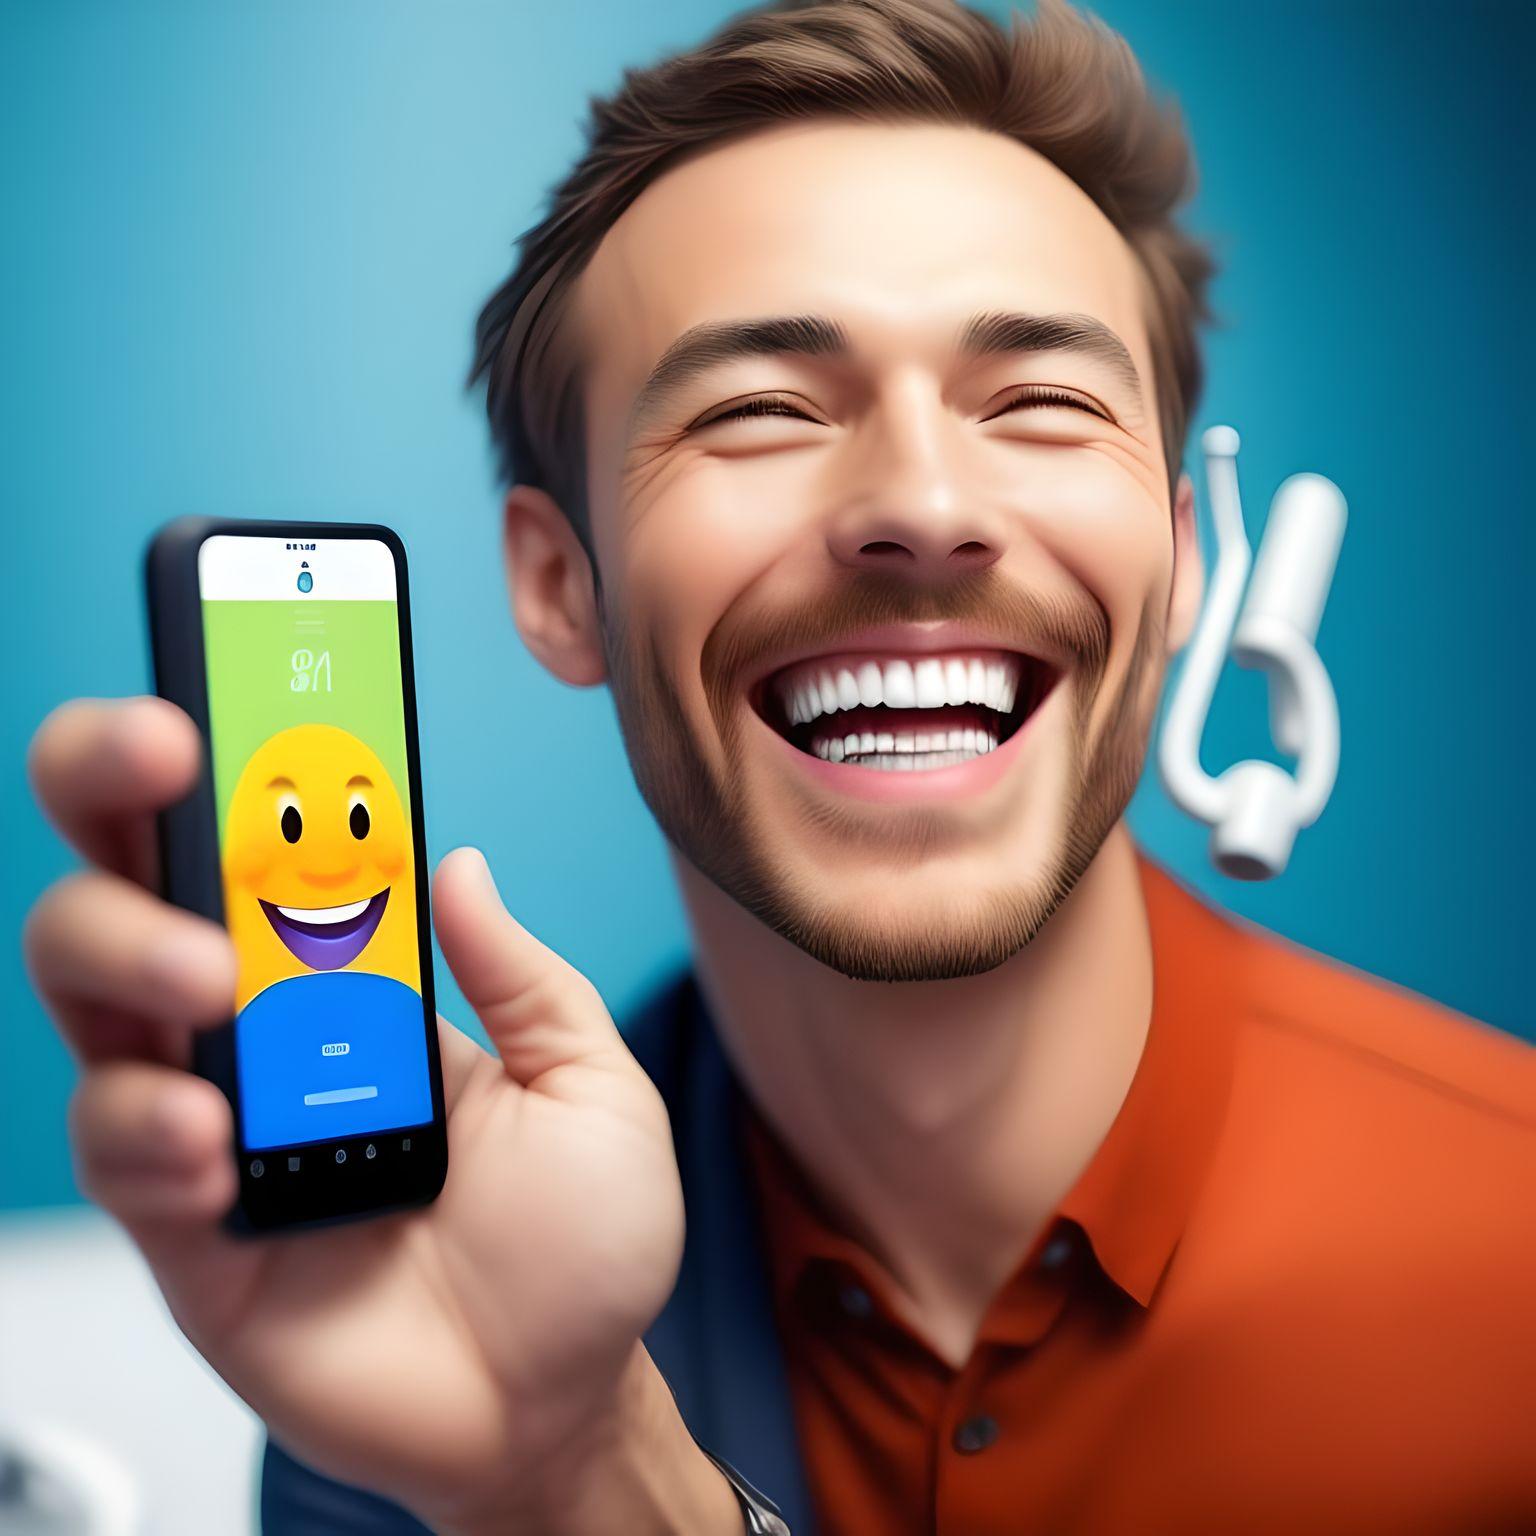 A smiling man side by side with a hand holding a smartphone, displaying an app with a smiling emoji